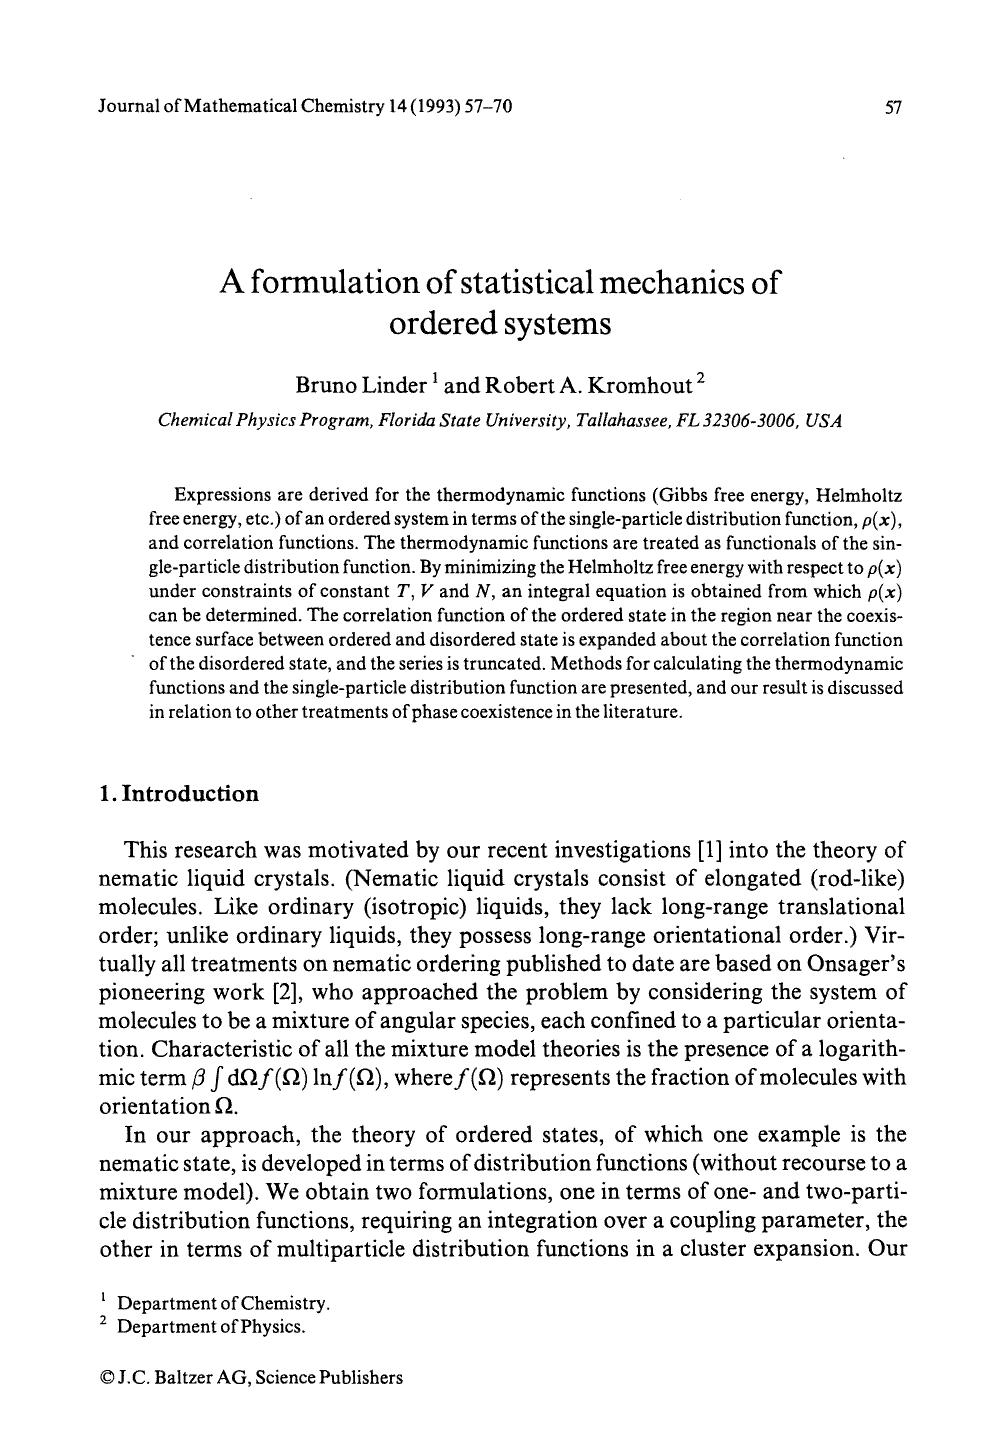 A formulation of statistical mechanics of ordered systems by Unknown